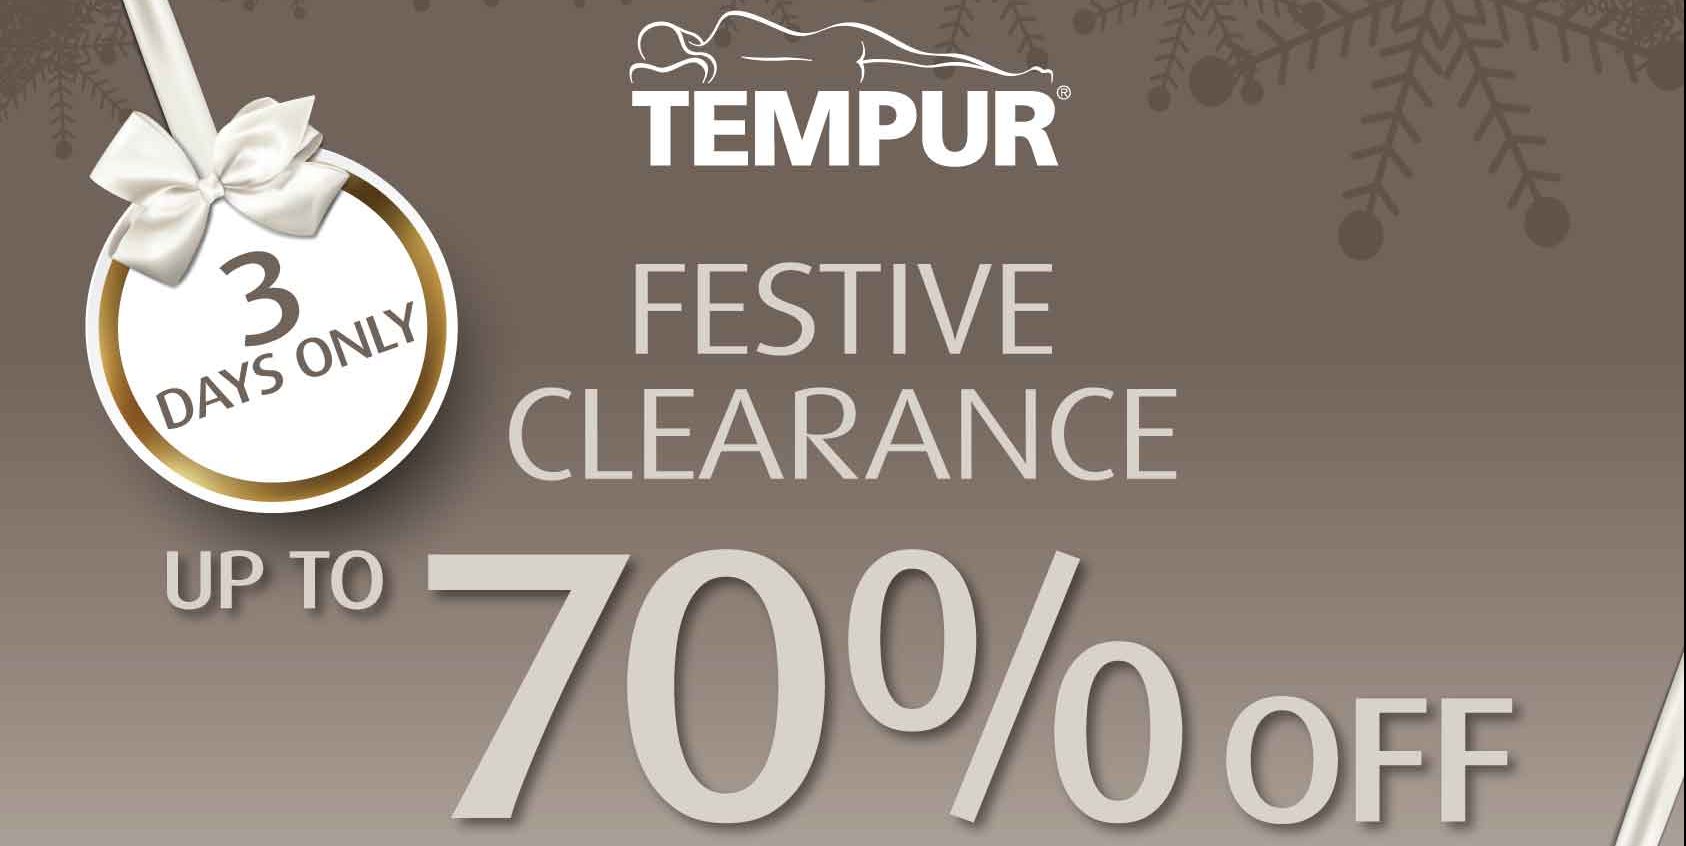 TEMPUR Singapore Festive Clearance Up to 70% Off Promotion 18-20 Nov 2016